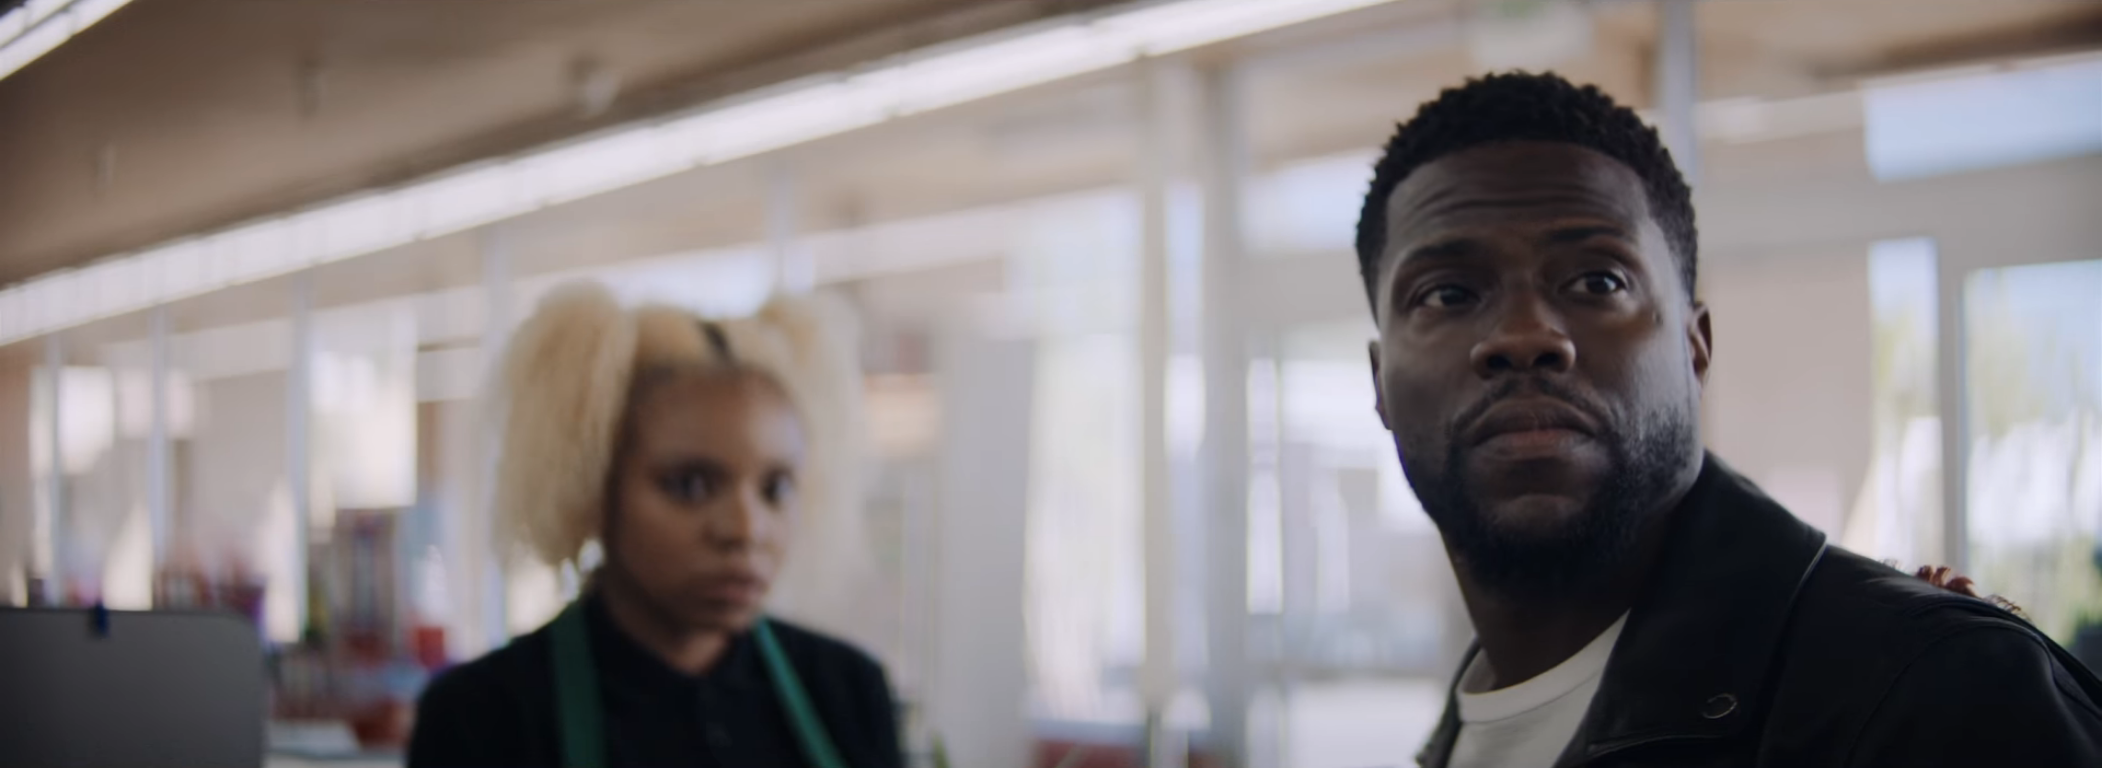 The Quick Read: Kevin Hart Relives Cheating Scandal In J. Cole’s ‘Kevin’s Heart’ Video